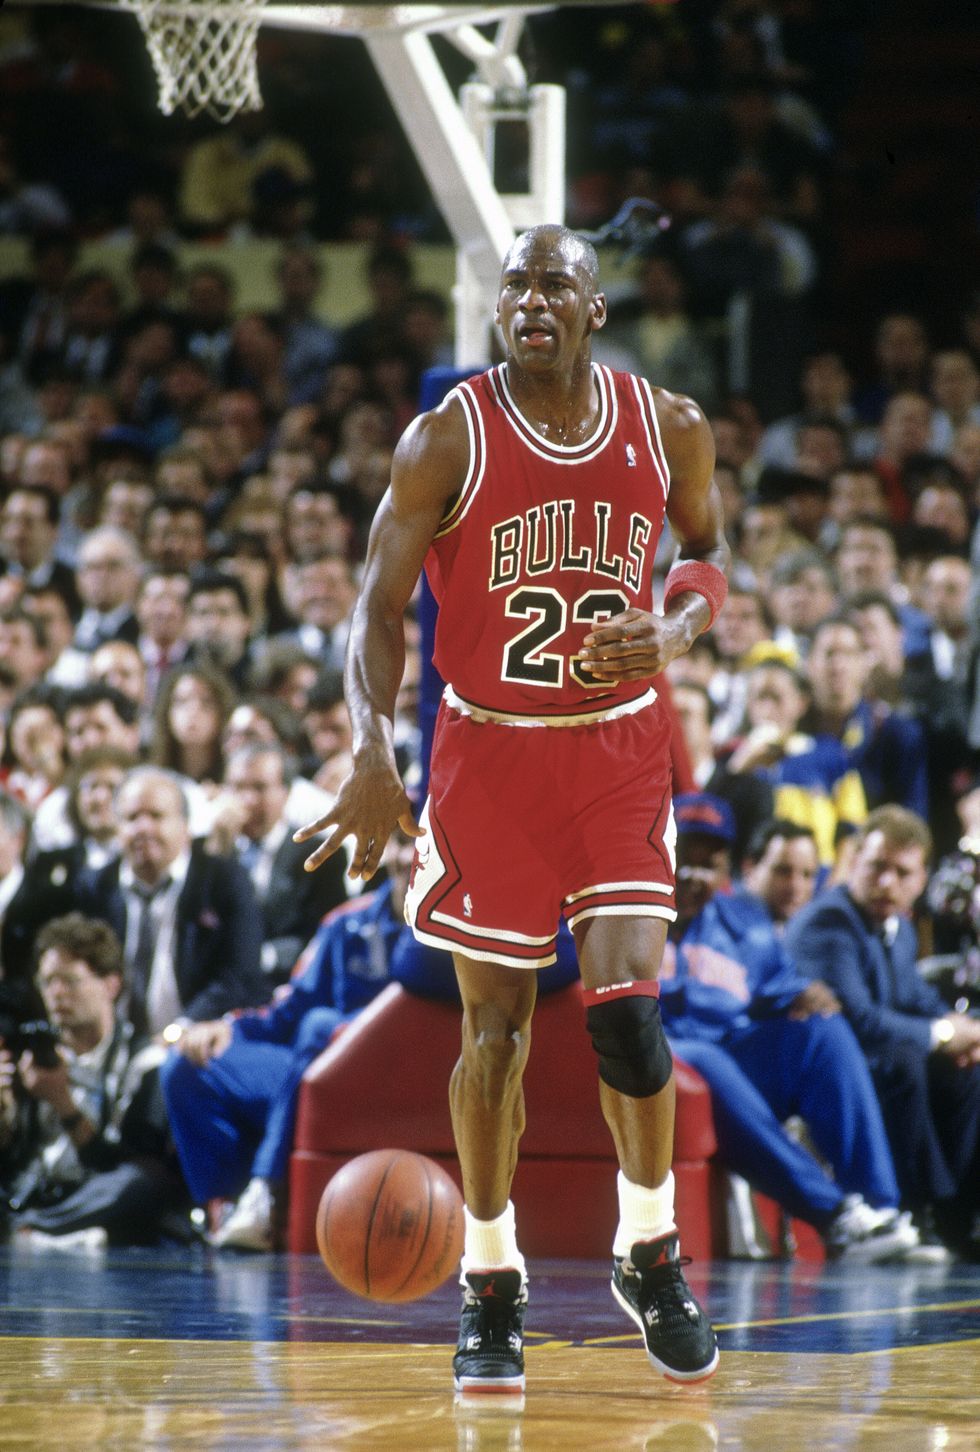 new york circa 1989 michael jordan 23 of the chicago bulls dribbles the ball up court against the new york knicks during an nba basketball game circa 1989 at madison square garden in the manhattan borough of new york city jordan played for the bulls from 1984 93 and 1995 98 photo by focus on sportgetty images  local caption  michael jordan